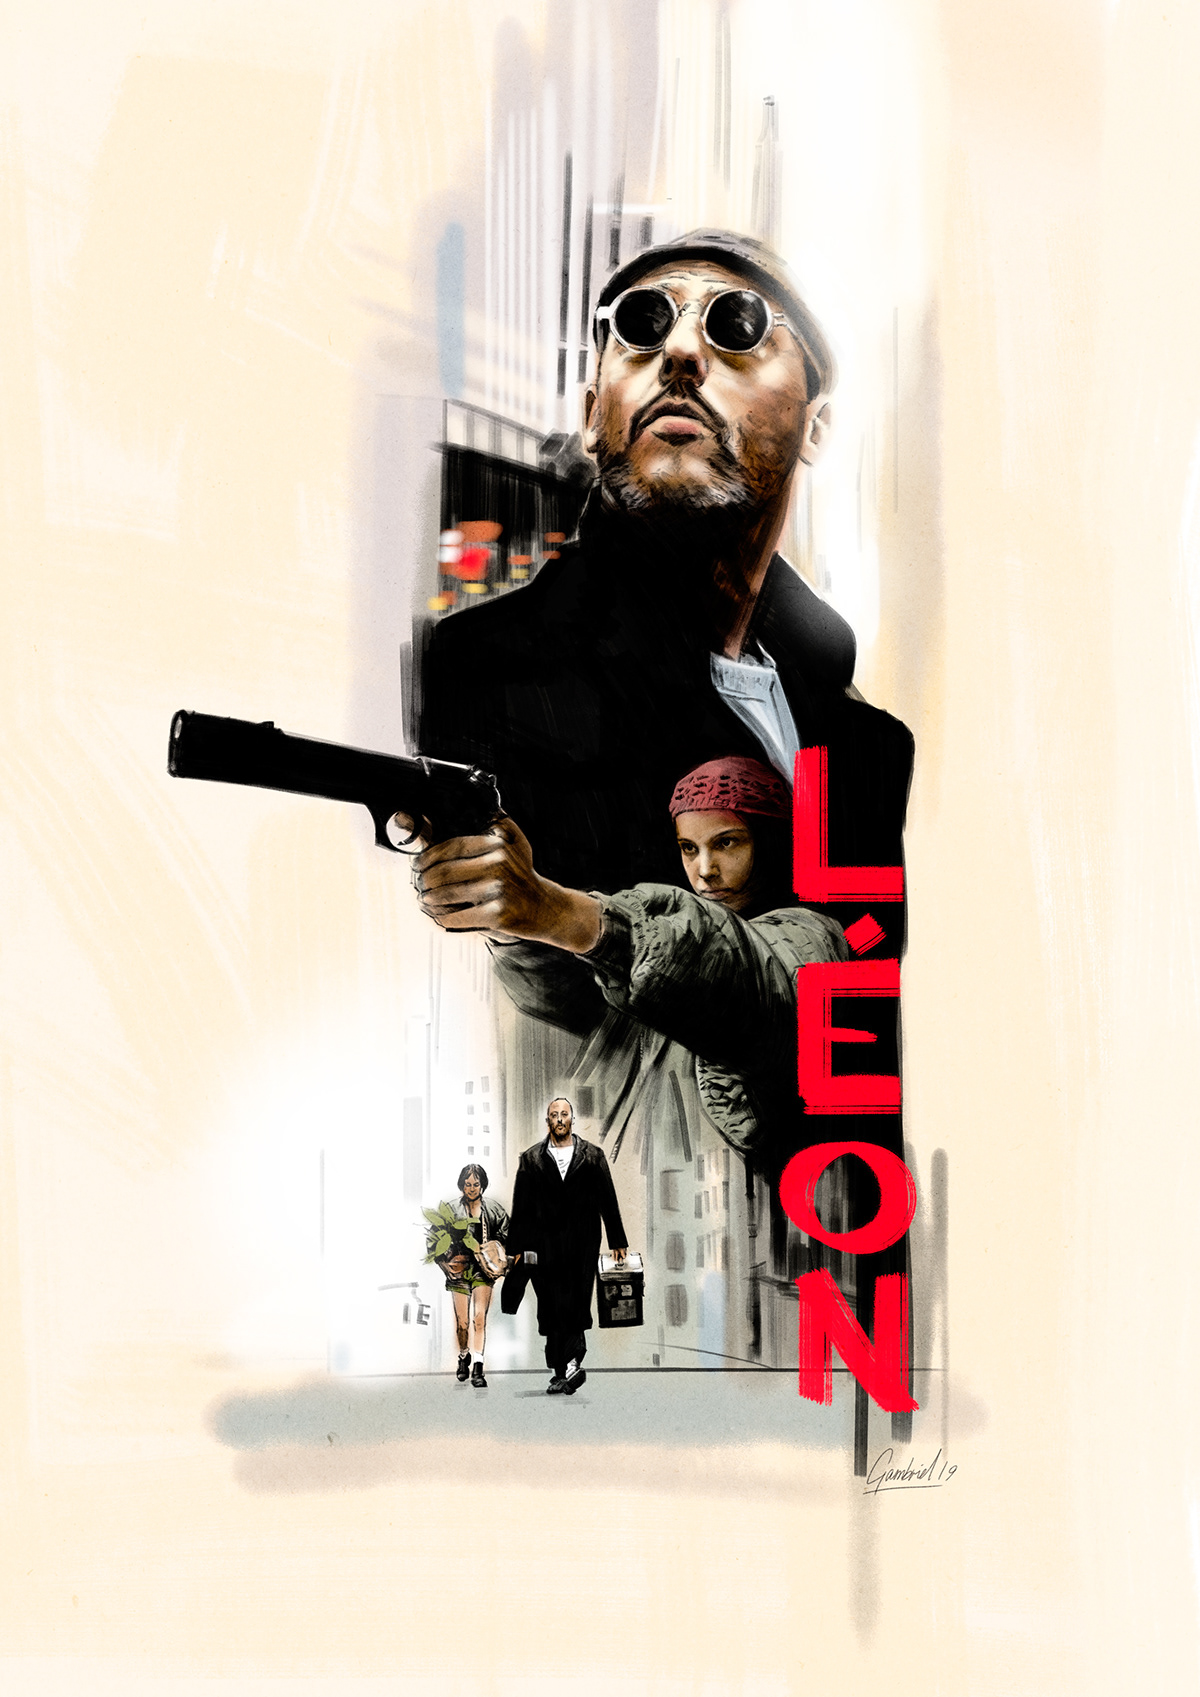 Leon movie poster, personal work.